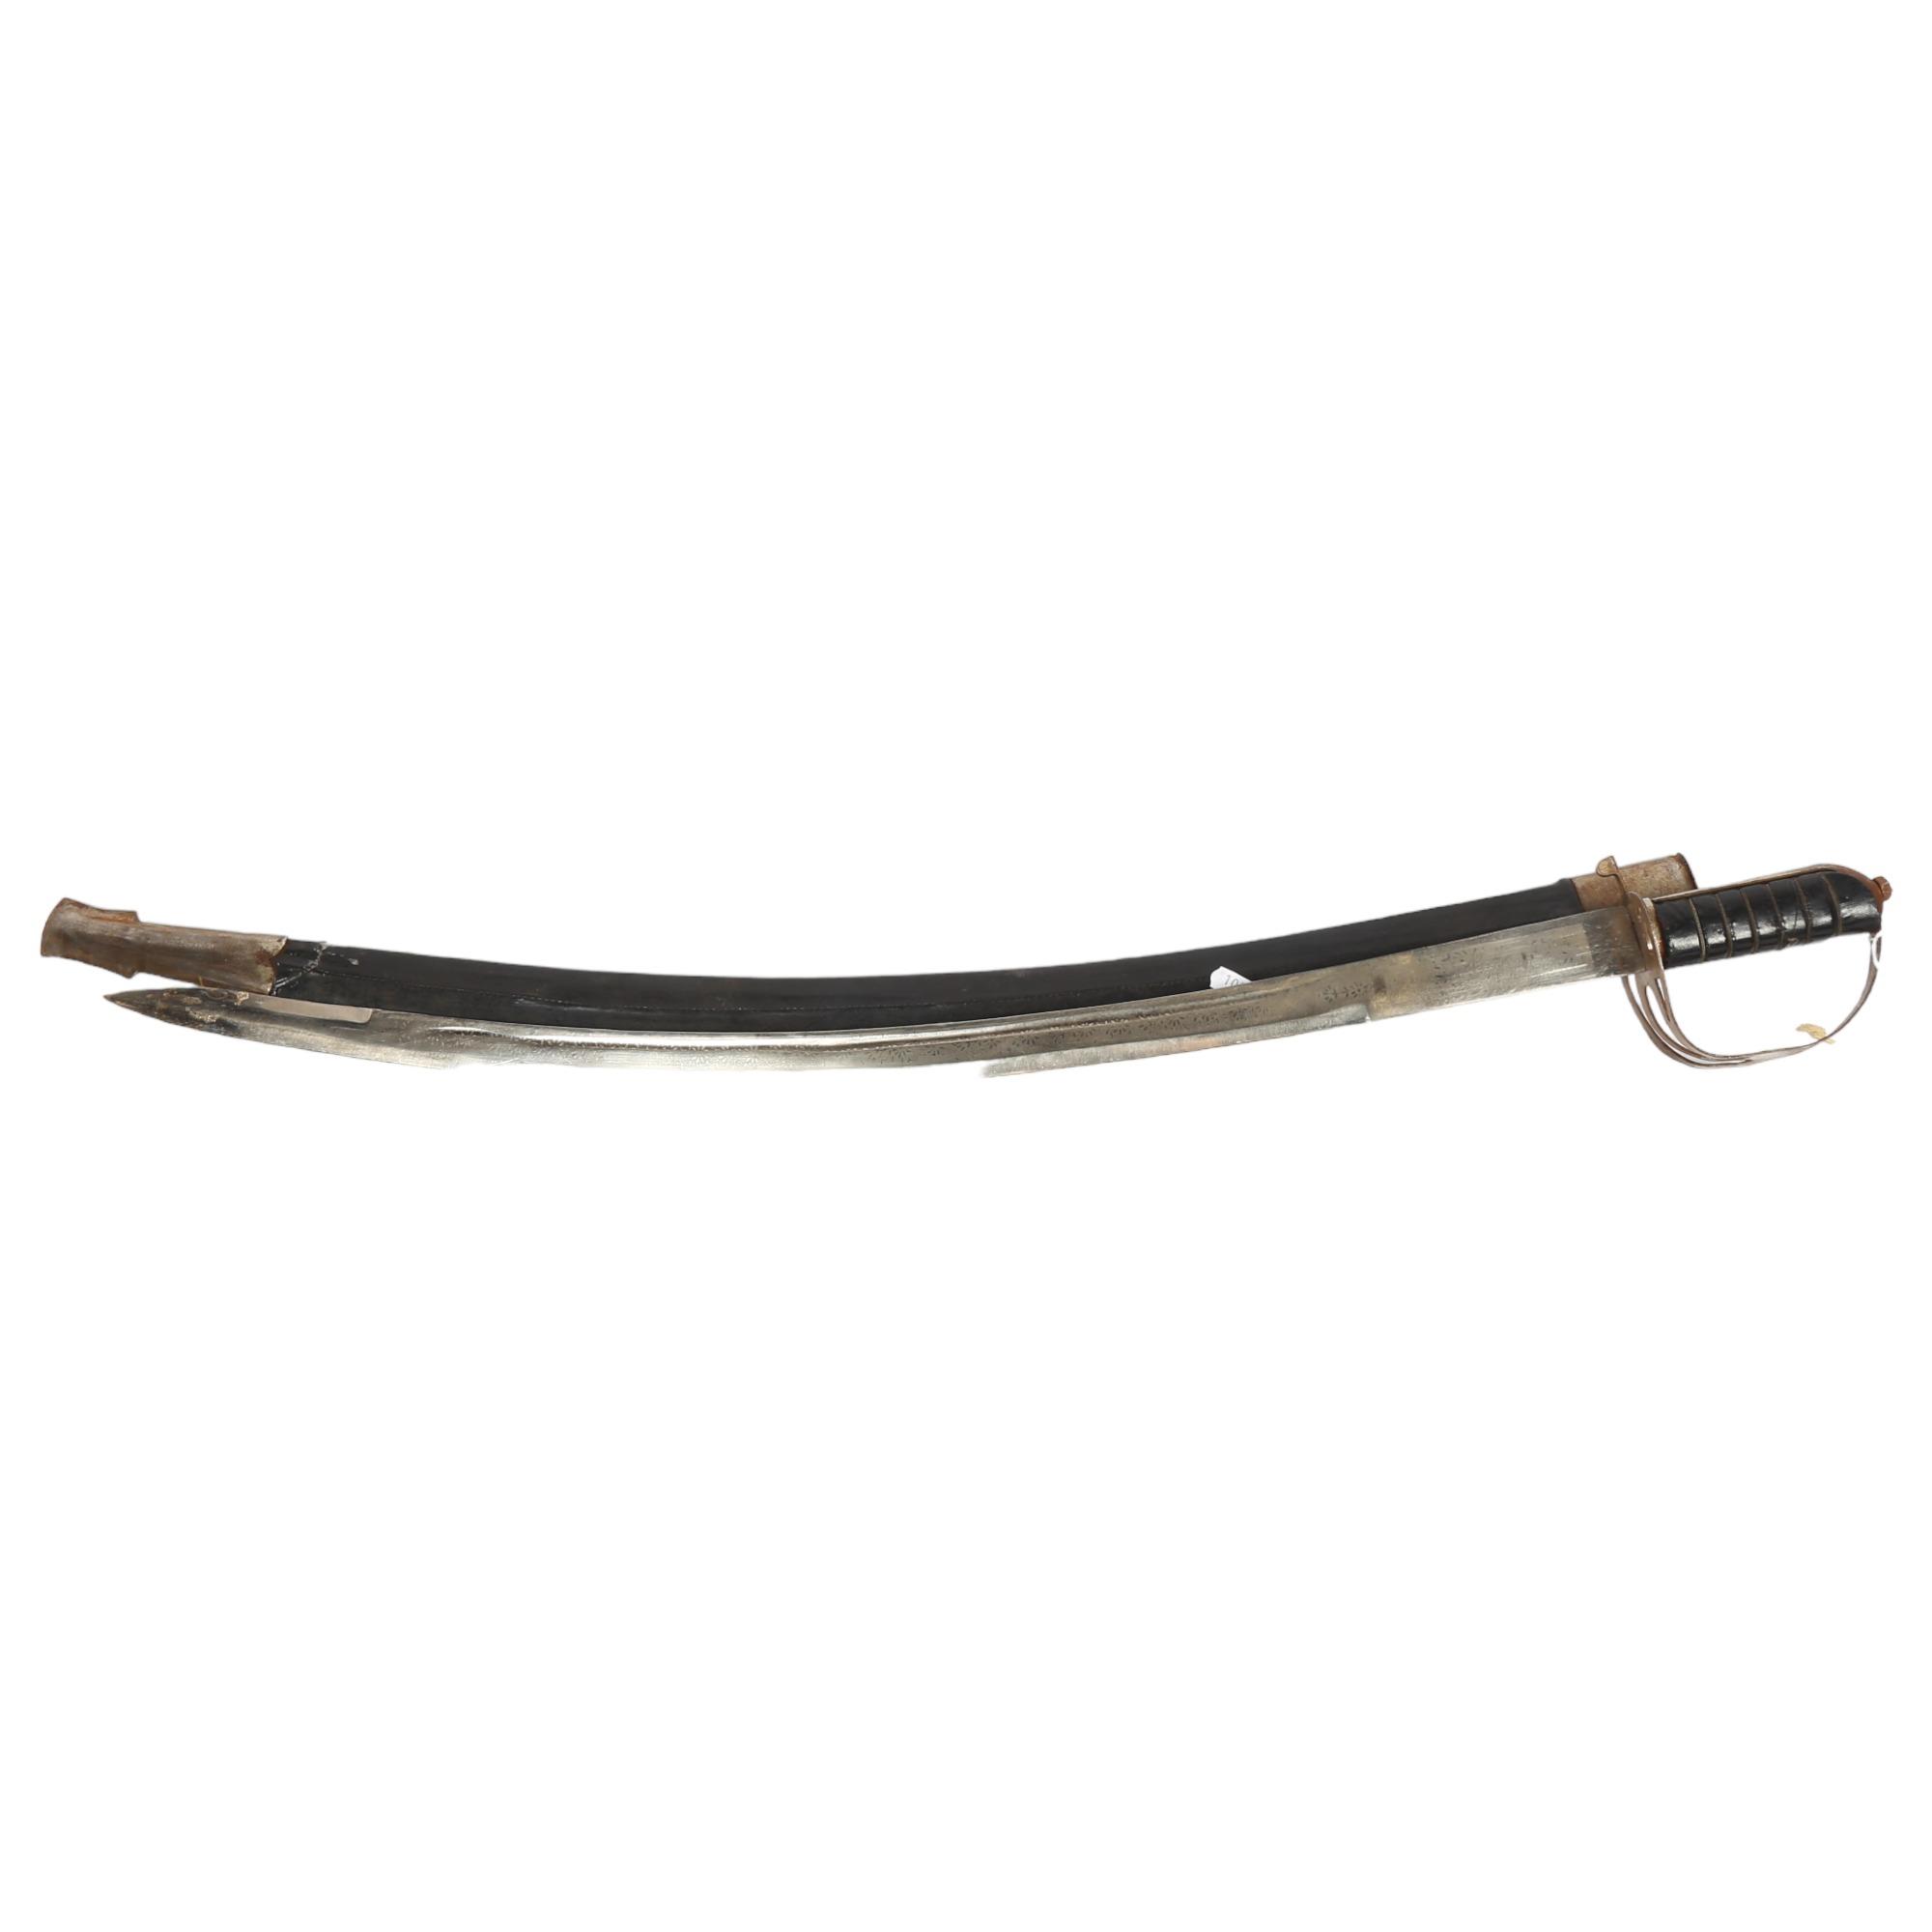 An Indian Officer's sword with engraved blade, L95cm